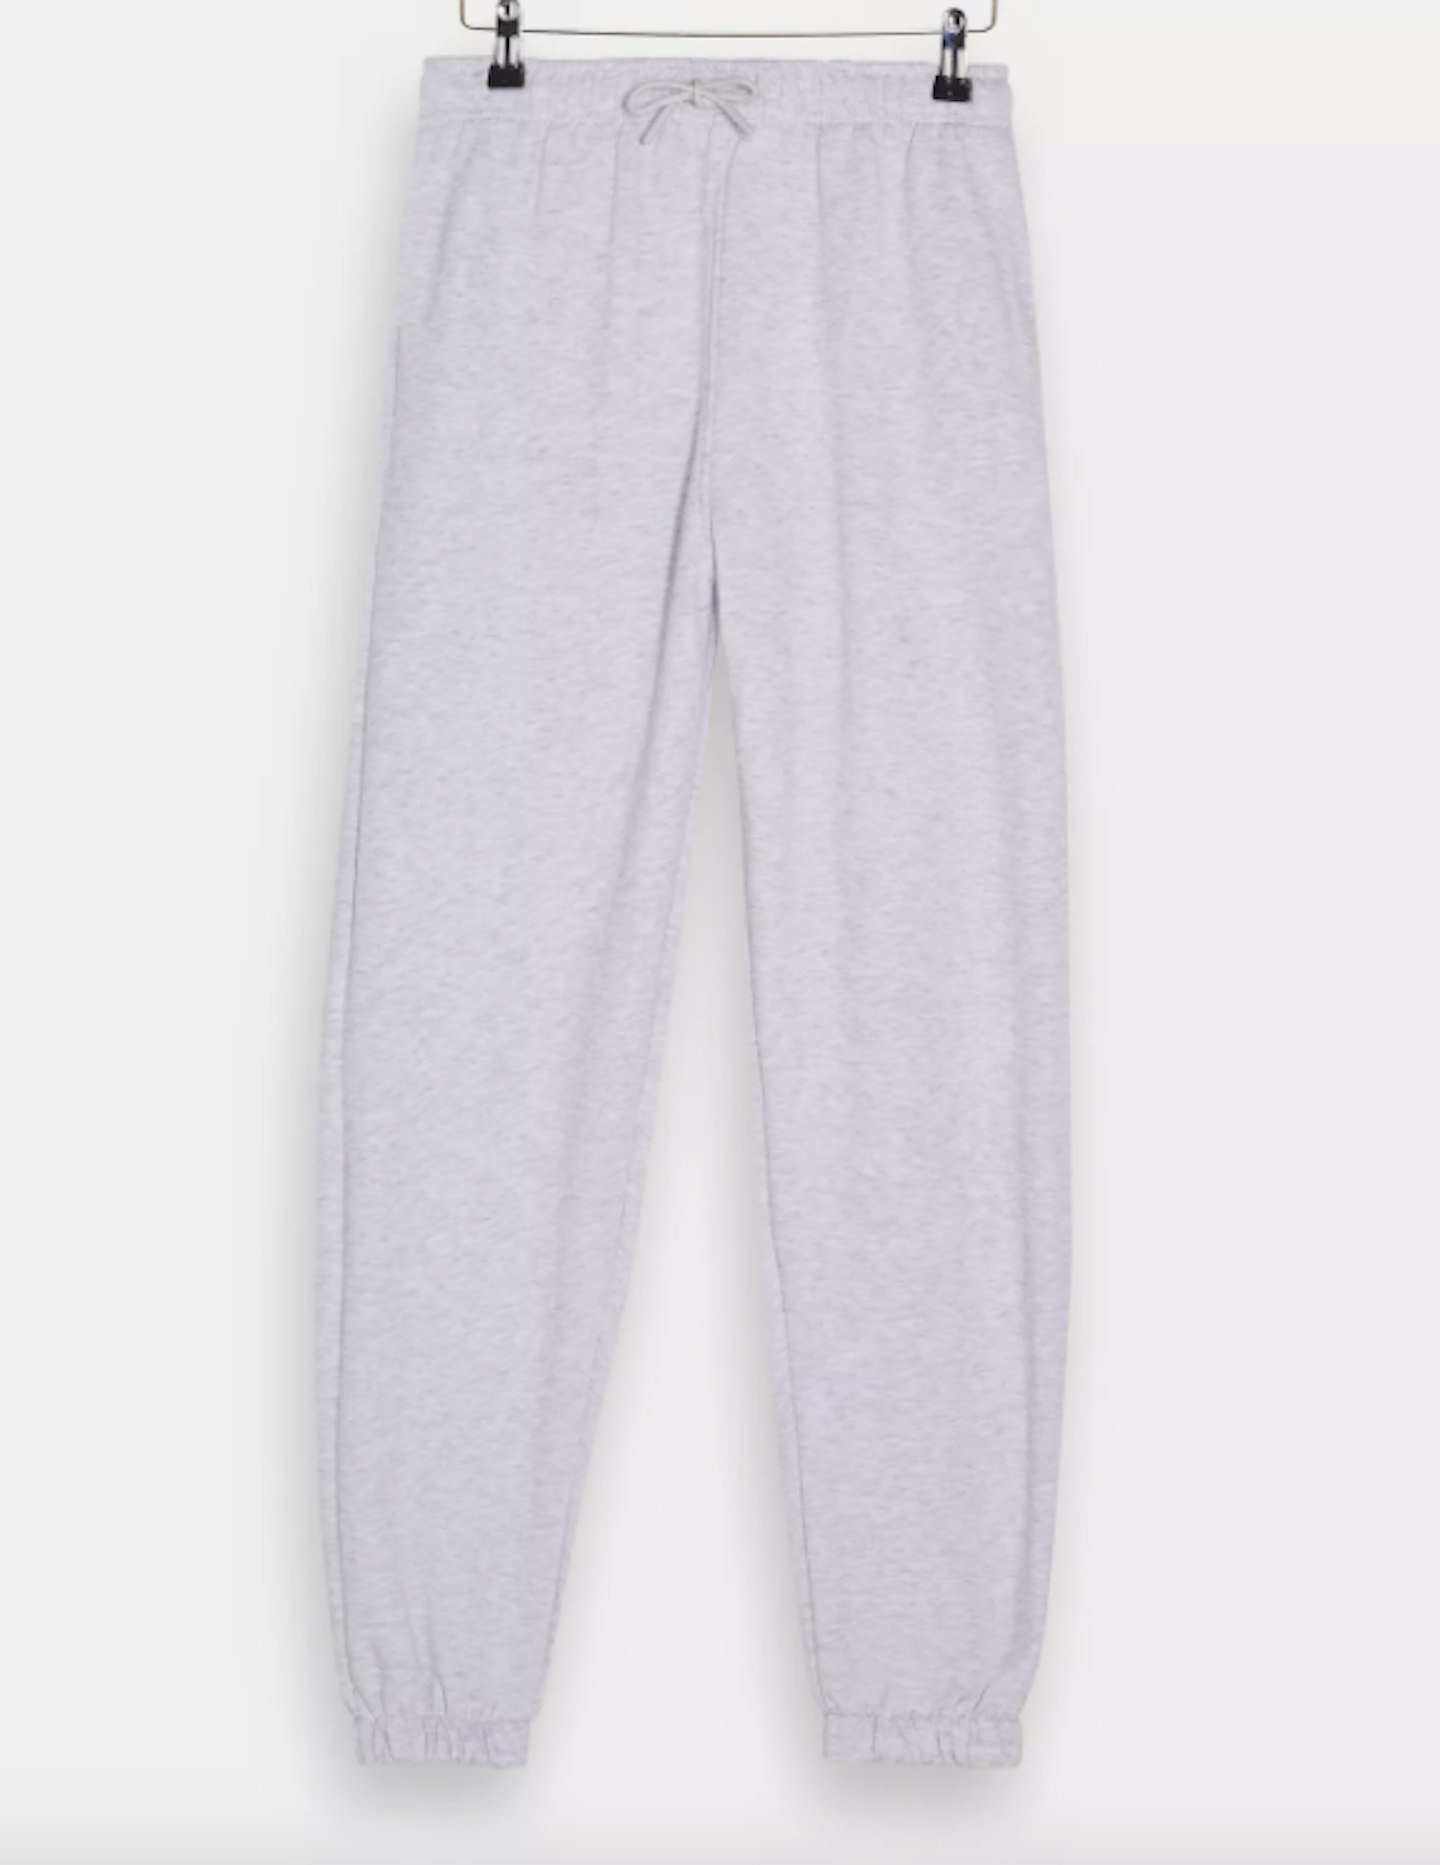 Topshop, Pale Grey '90s Oversized Joggers, WAS £25.99, NOW £19.49